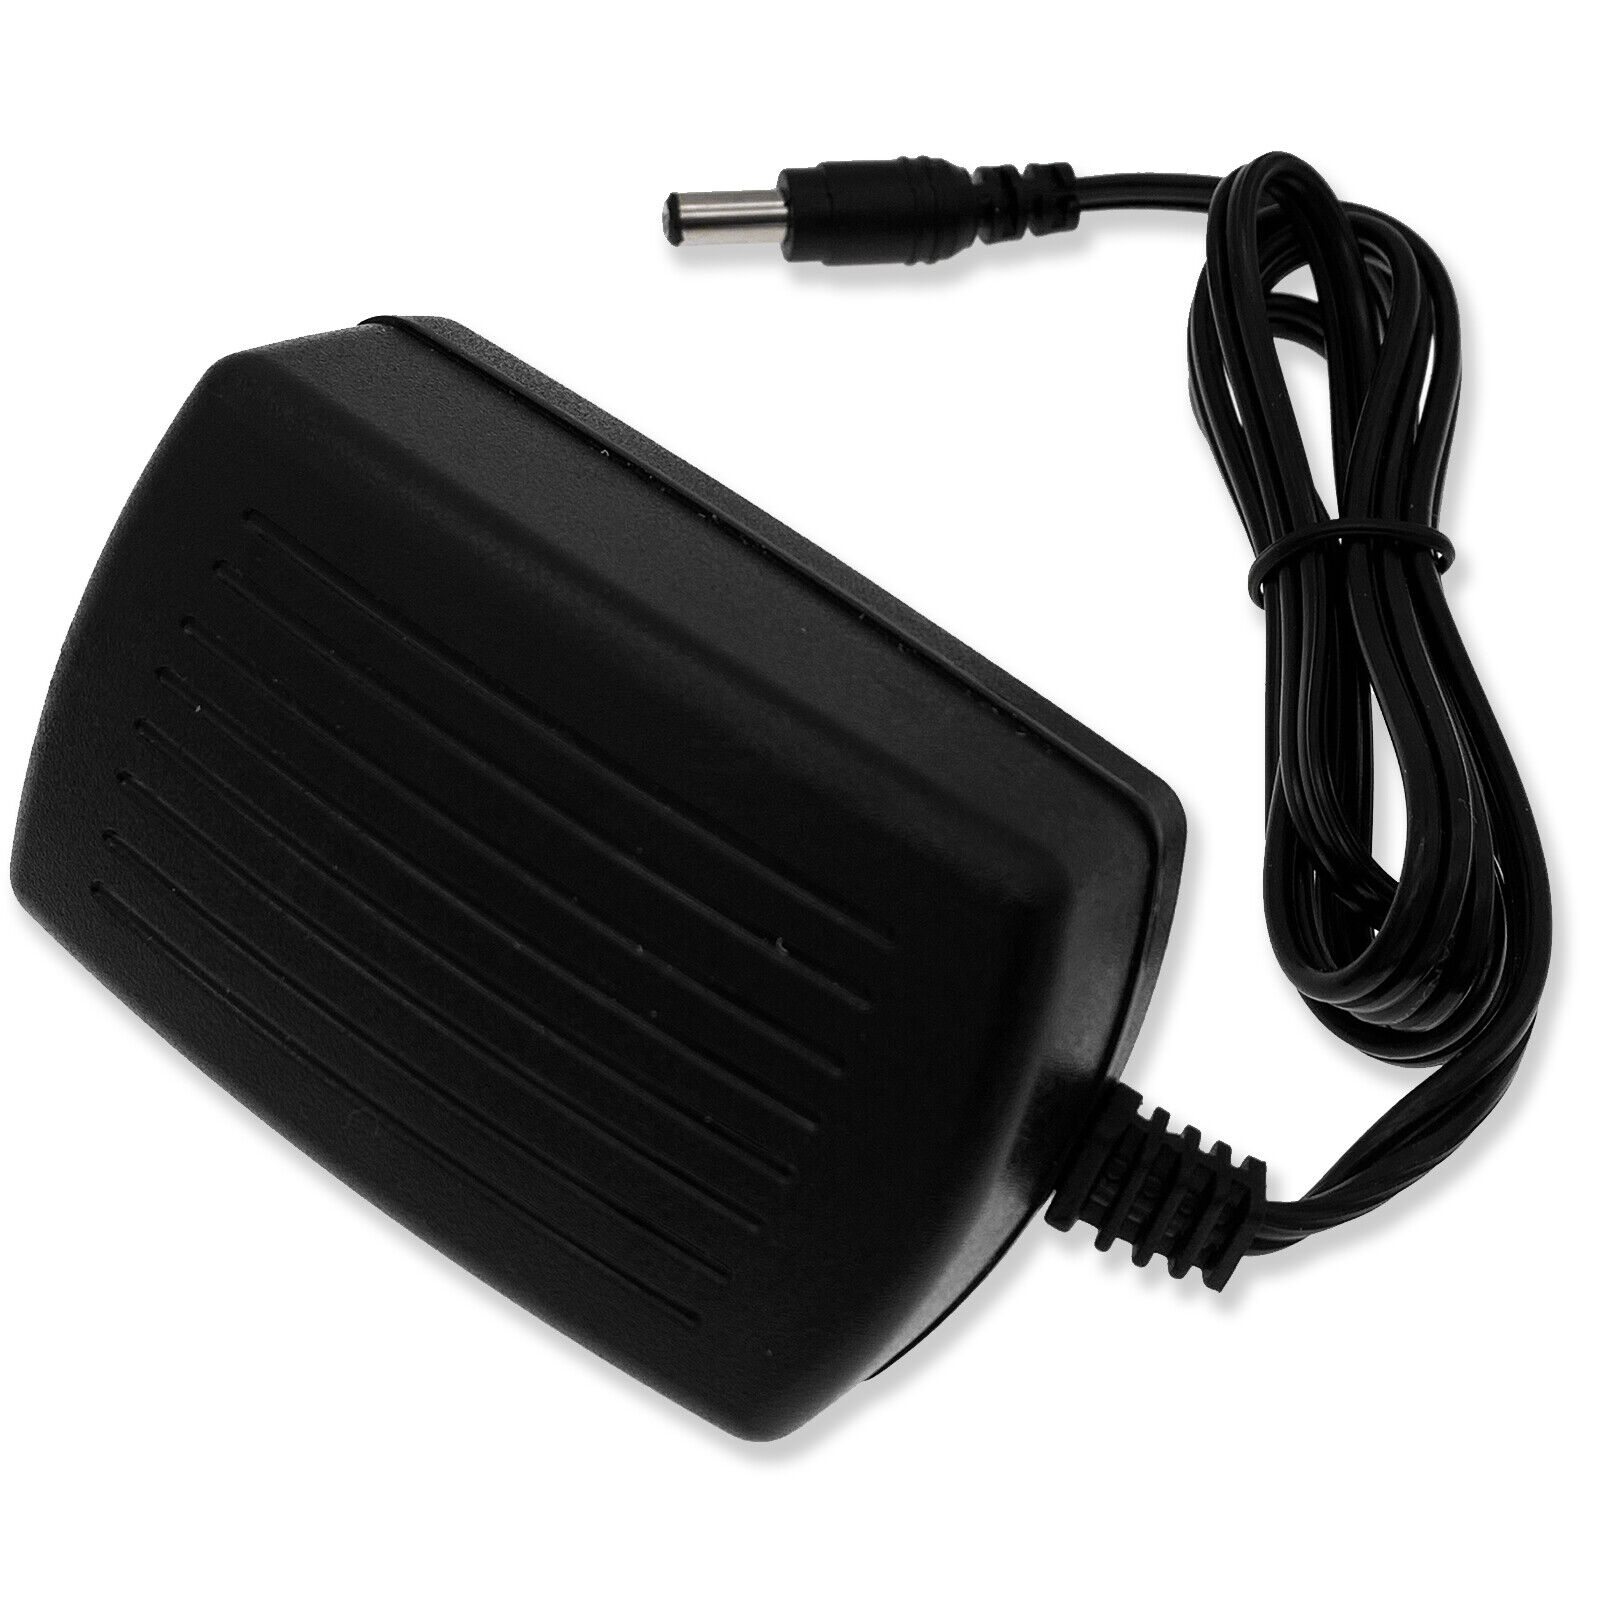 AC Charger Fit for Wahl Trimmer 9888L 9818L 9854L 9918D WNT-9 WNT- 9864 9876 9766 5622 5623 8779 796 - Click Image to Close